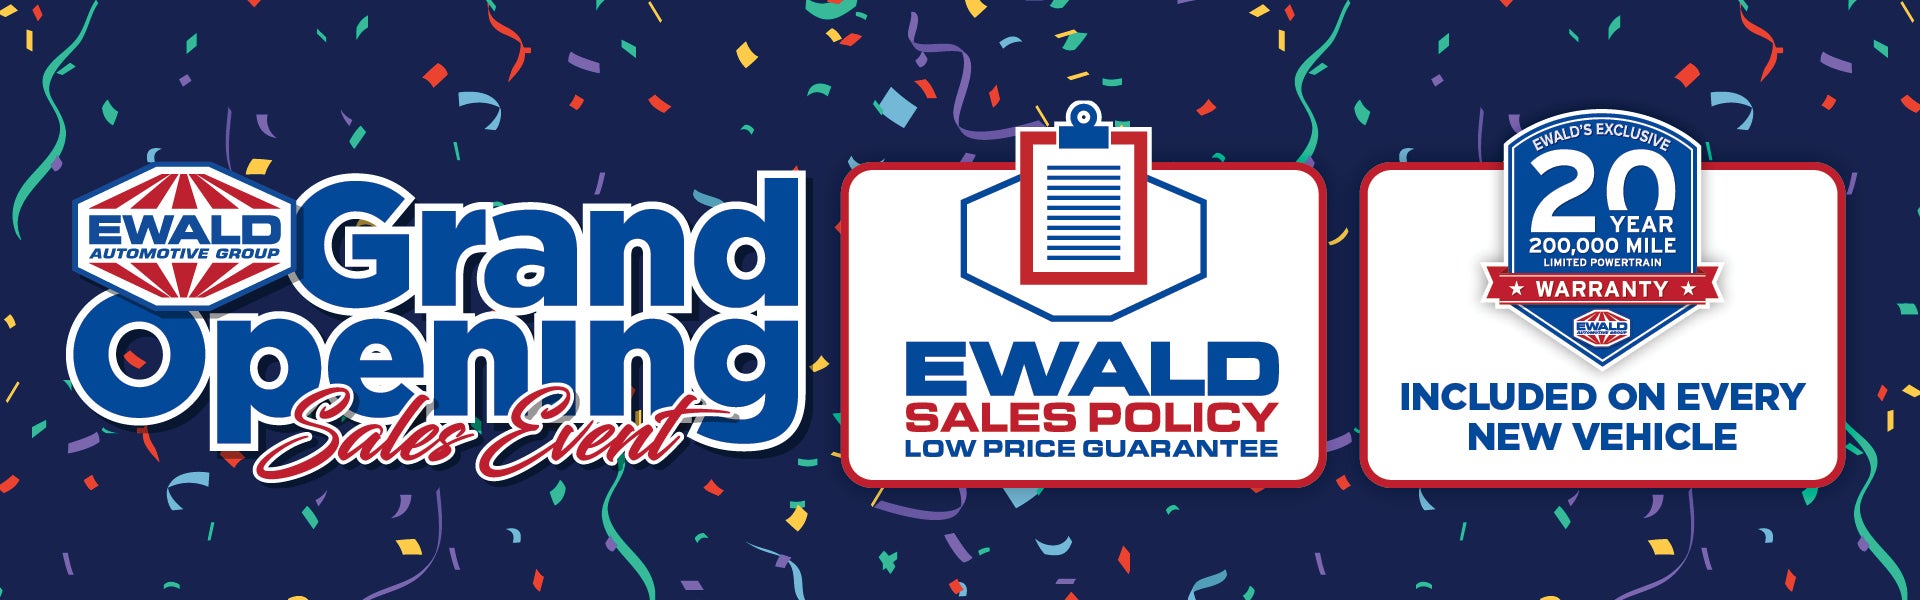 Ewald's Grand Opening Sale